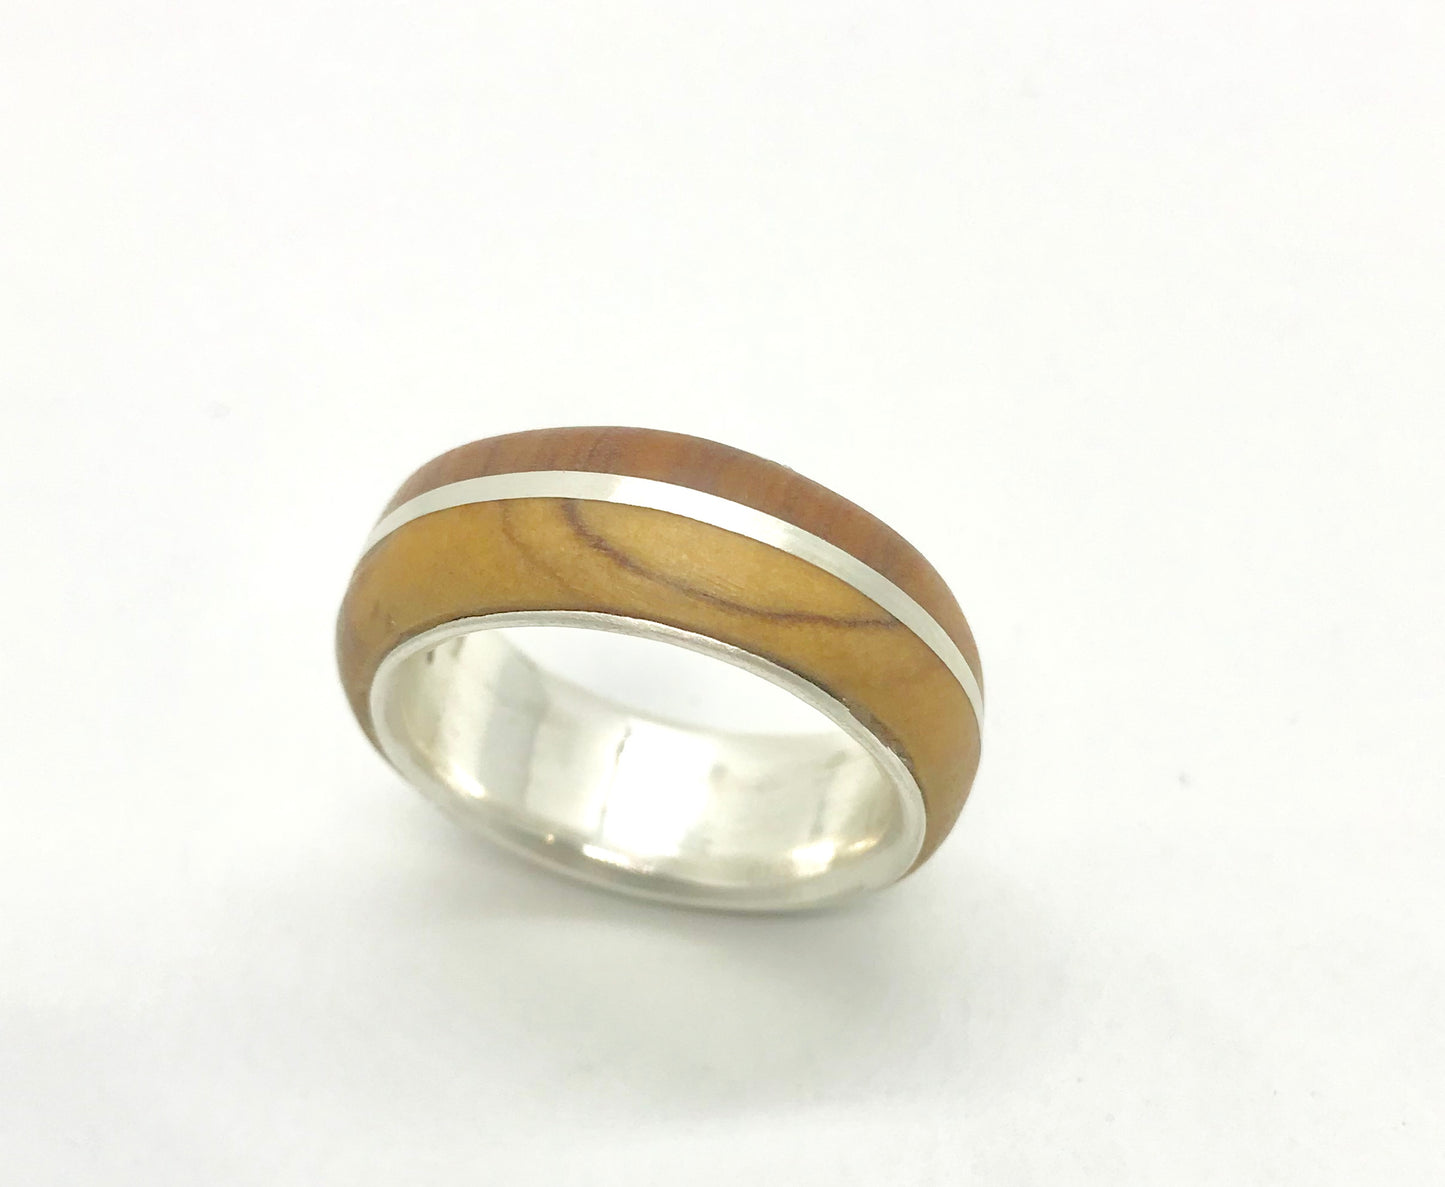 Close-up of the comfortable interior fit of the double-layer silver band with olive wood.